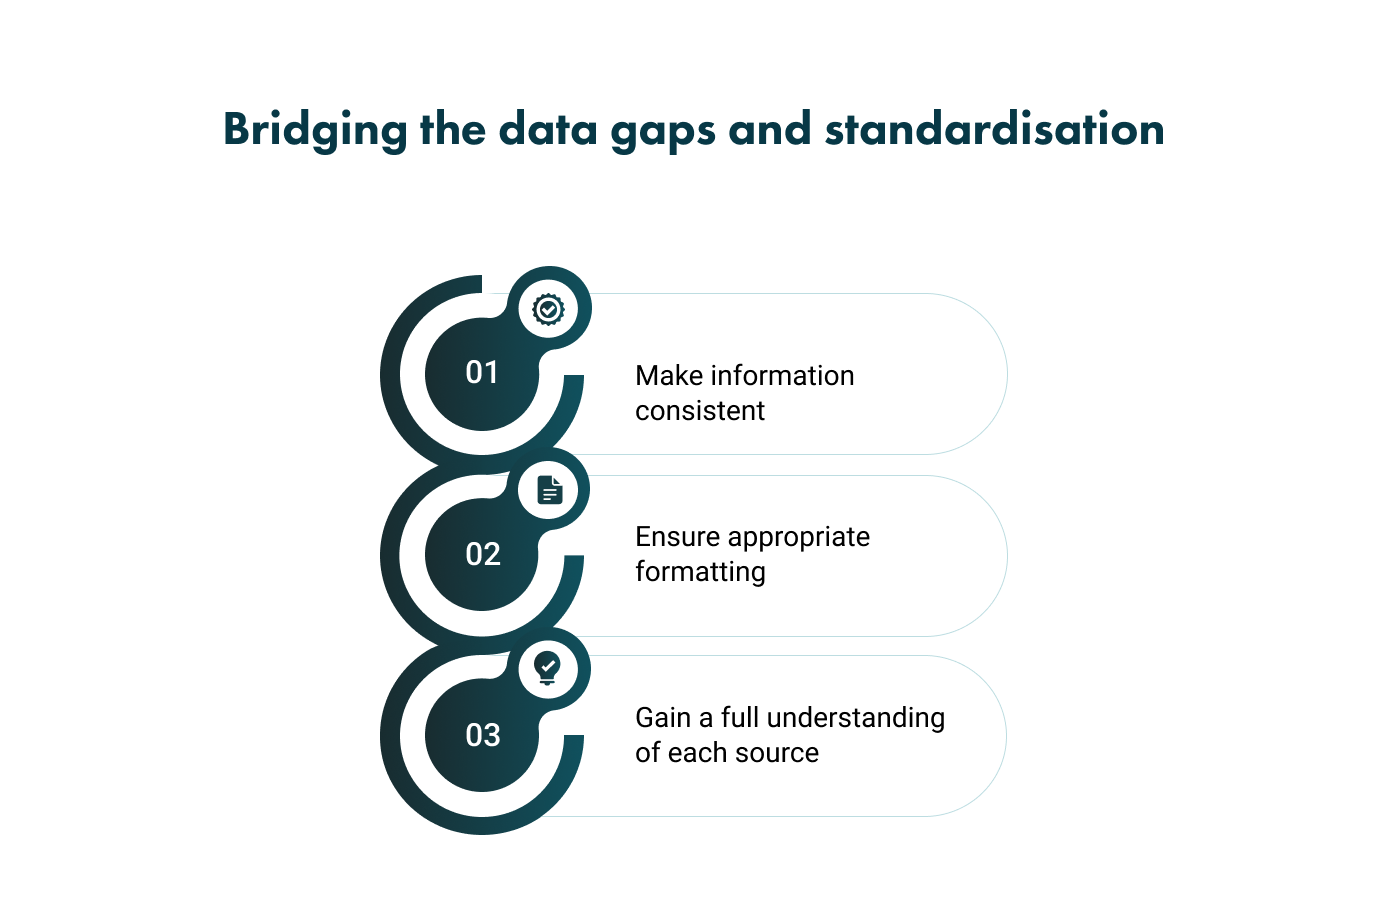 How to bridge data gaps and achieve standardisation: 1. Make information consistent, 2. Ensure appropriate formatting, and 3. Gain a full understanding of each source.  